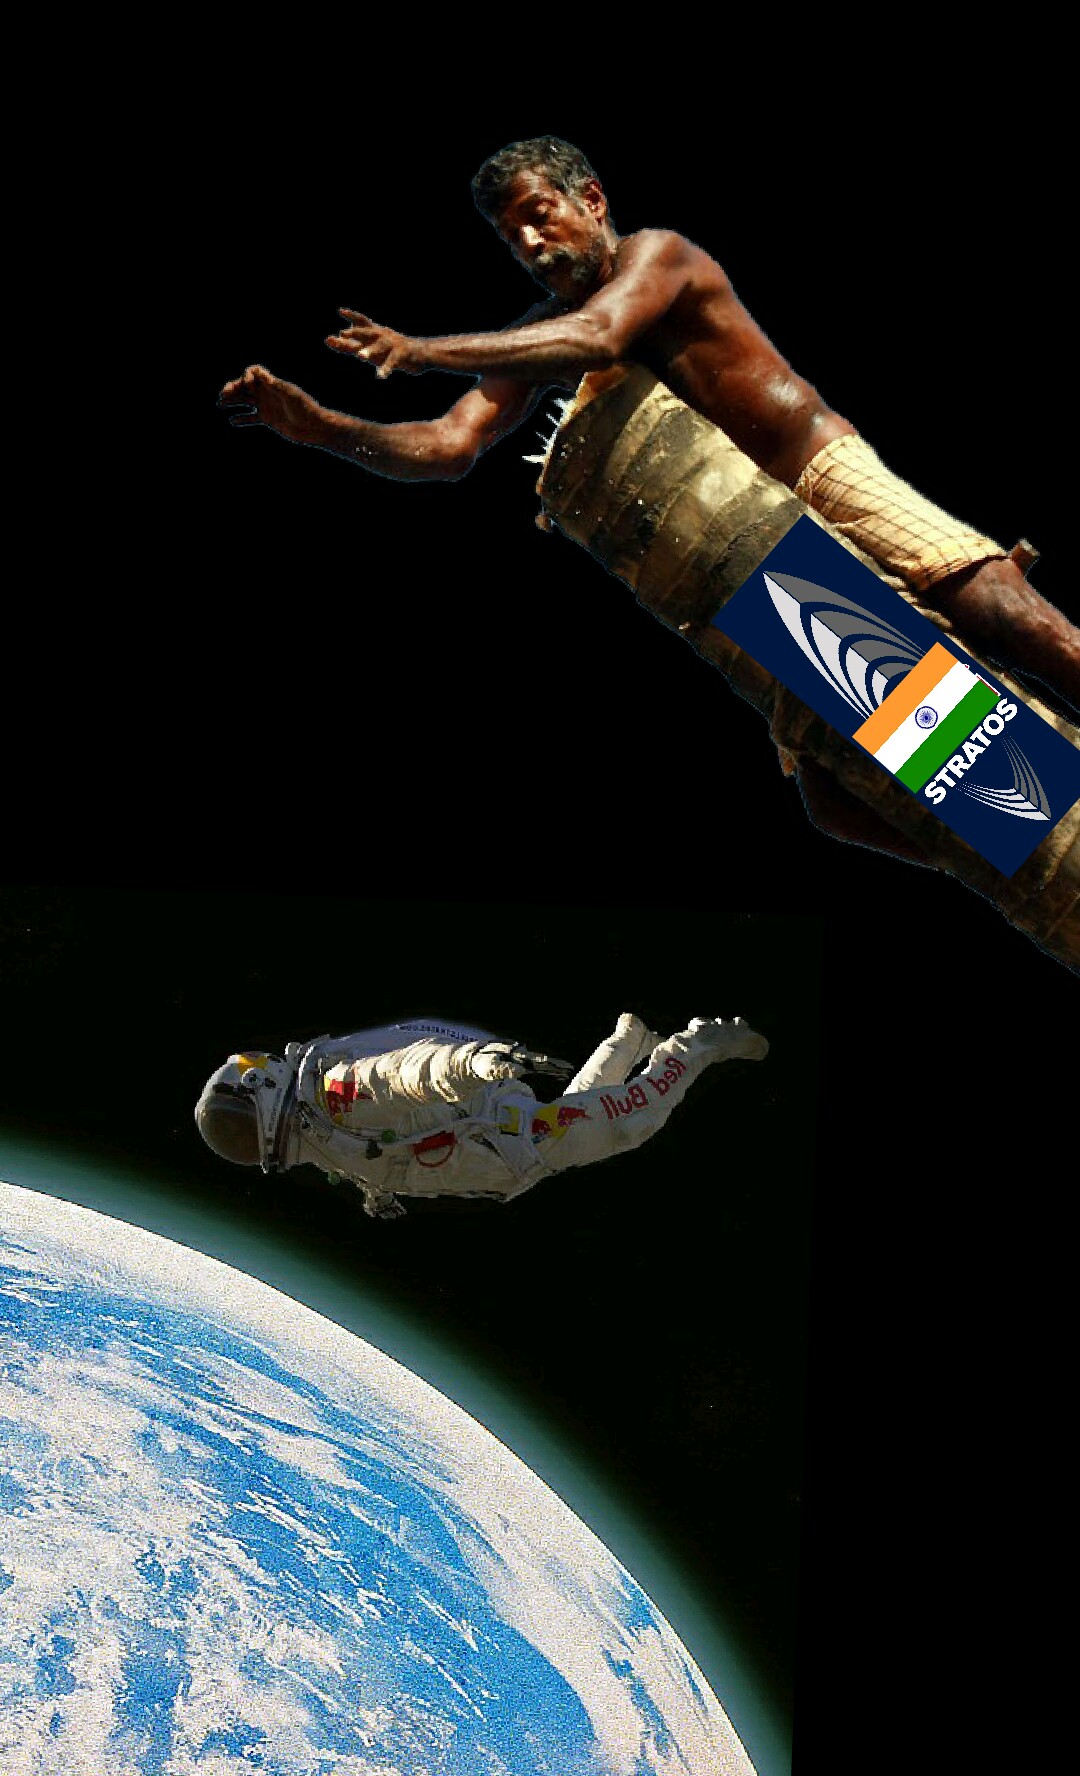 Indian Space Program teams up with RedBull